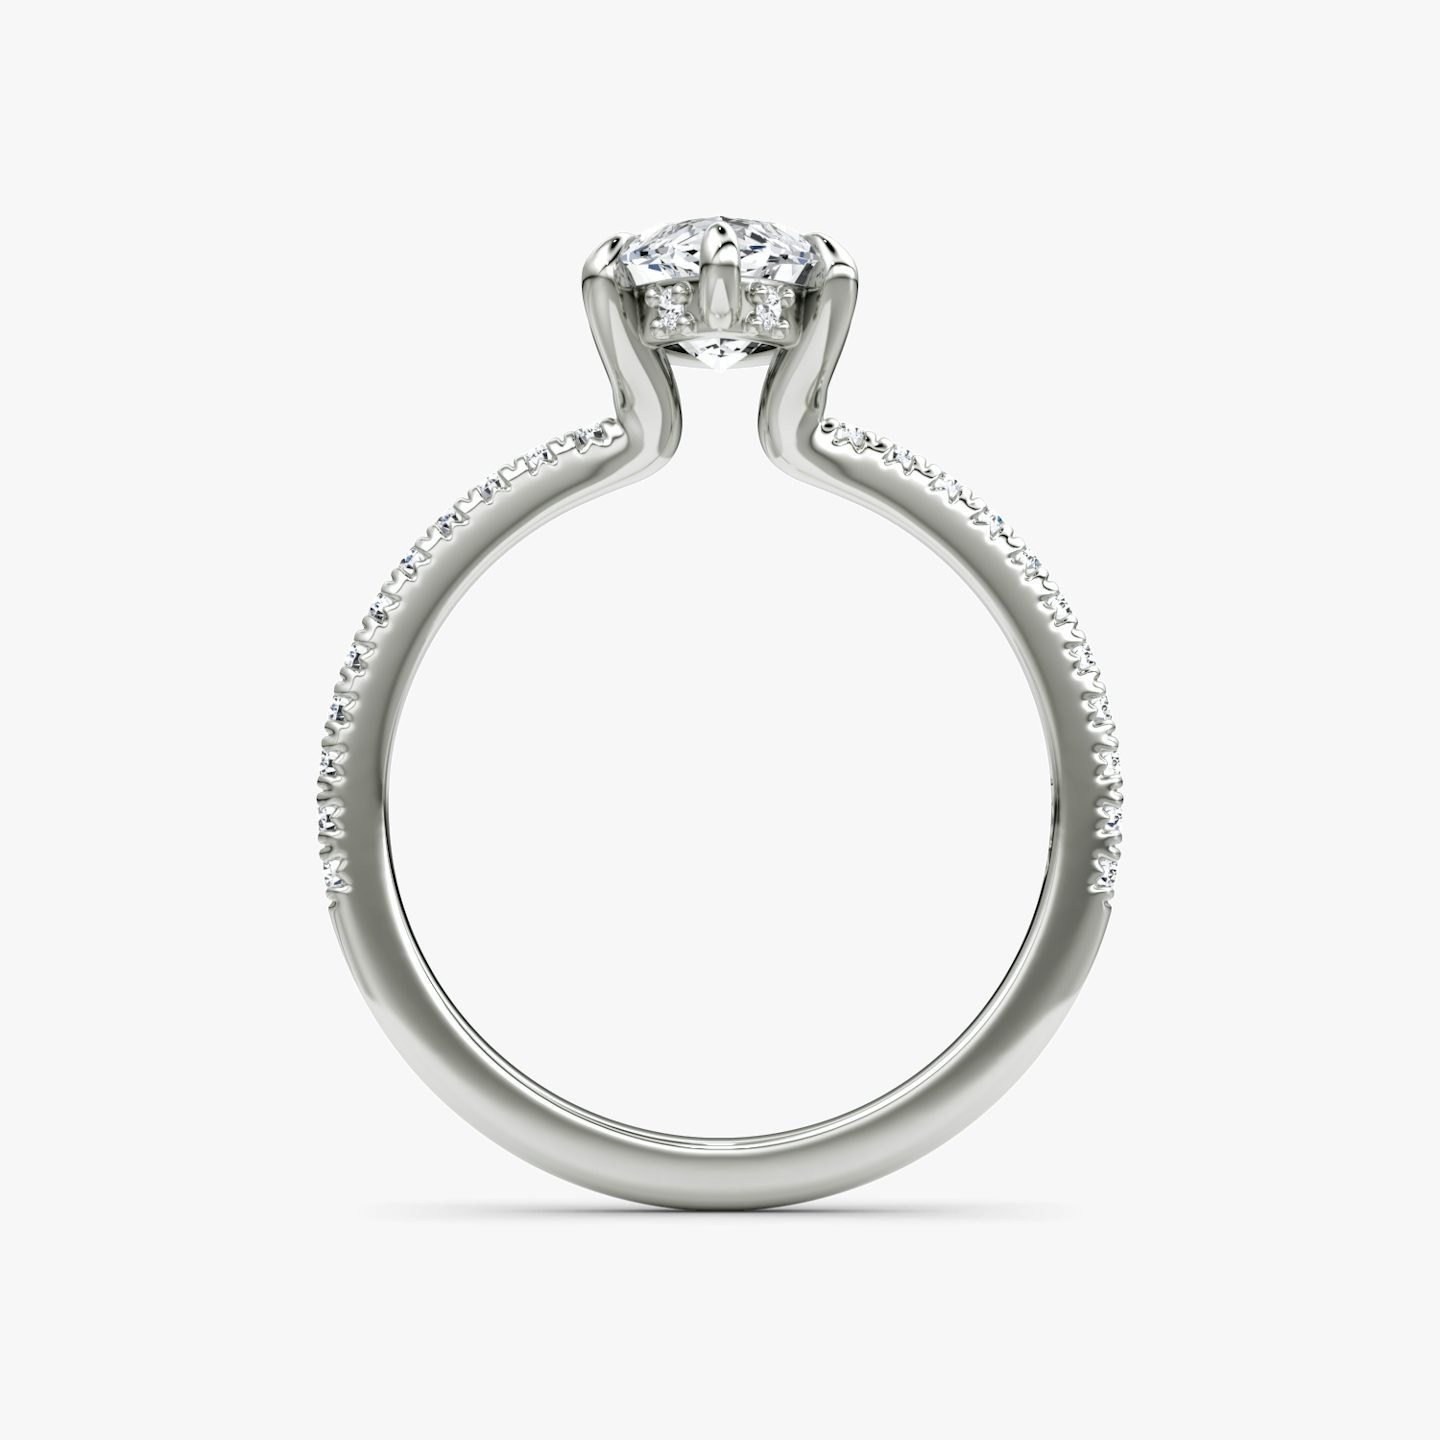 undefined | Marquise | 18k | Or blanc | bandAccent: Pavé | diamondOrientation: vertical | caratWeight: other